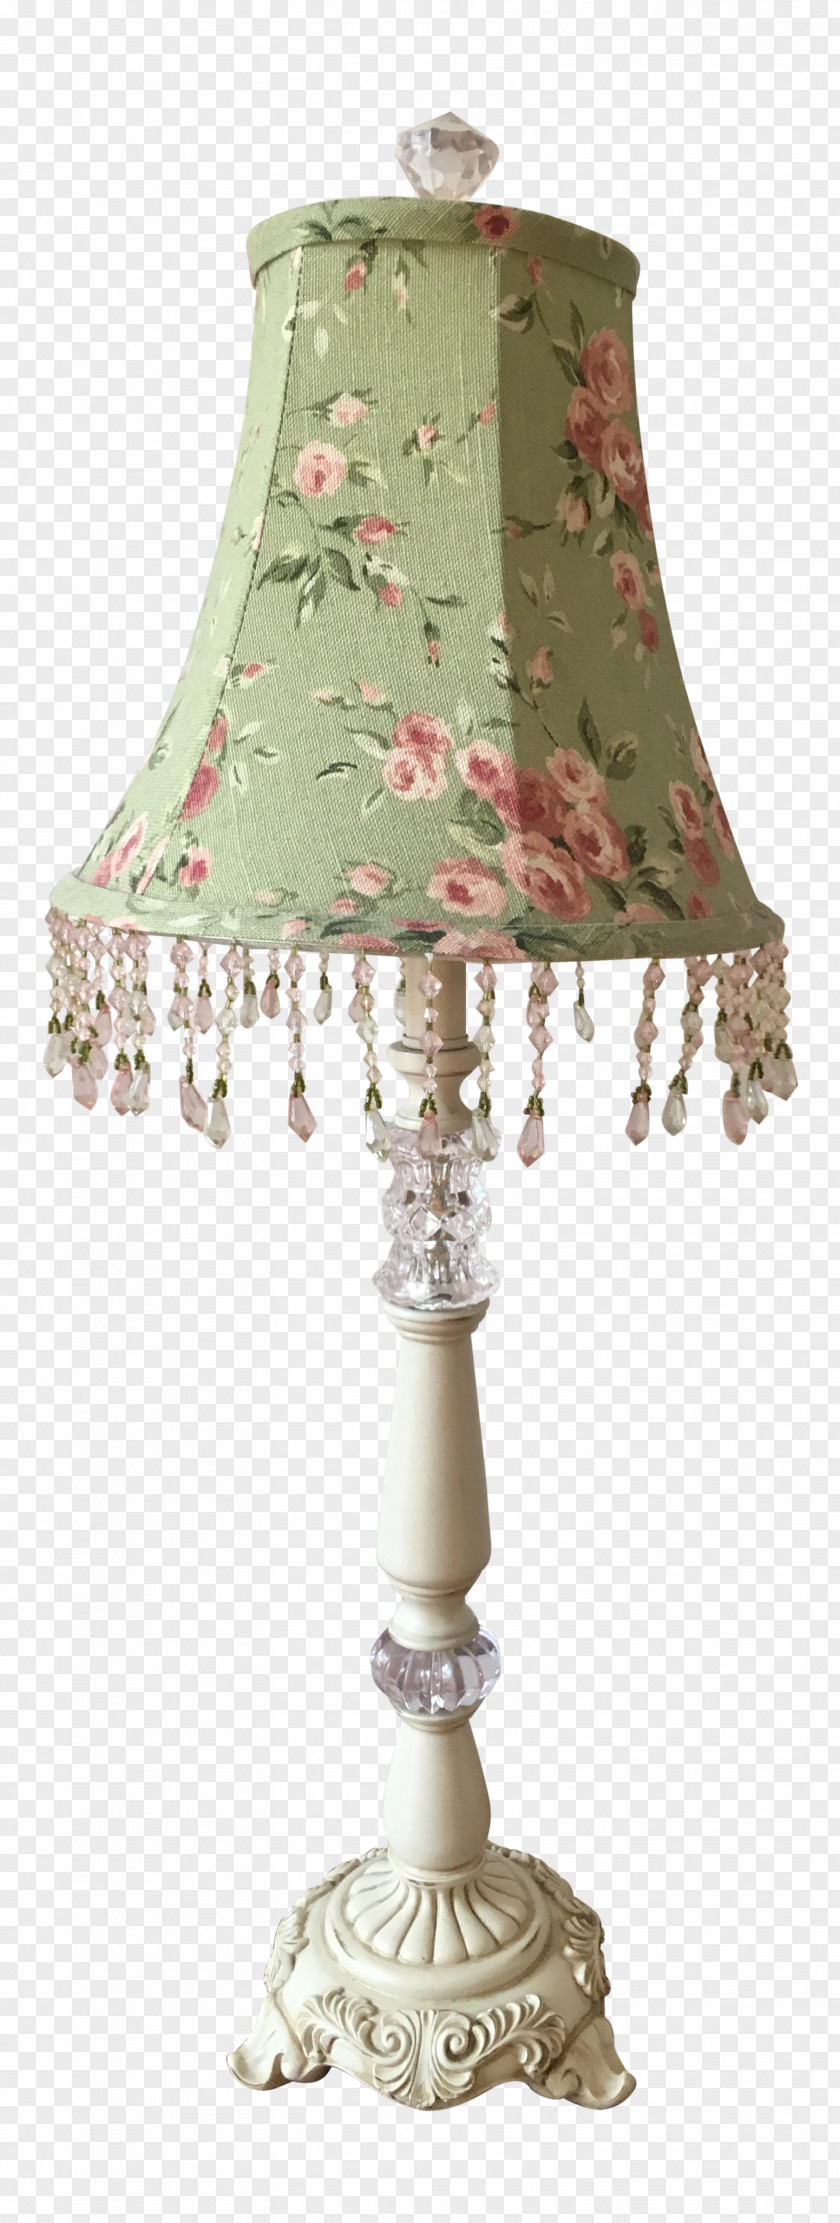 Shabby Chic Flower Lamp Shades PNG